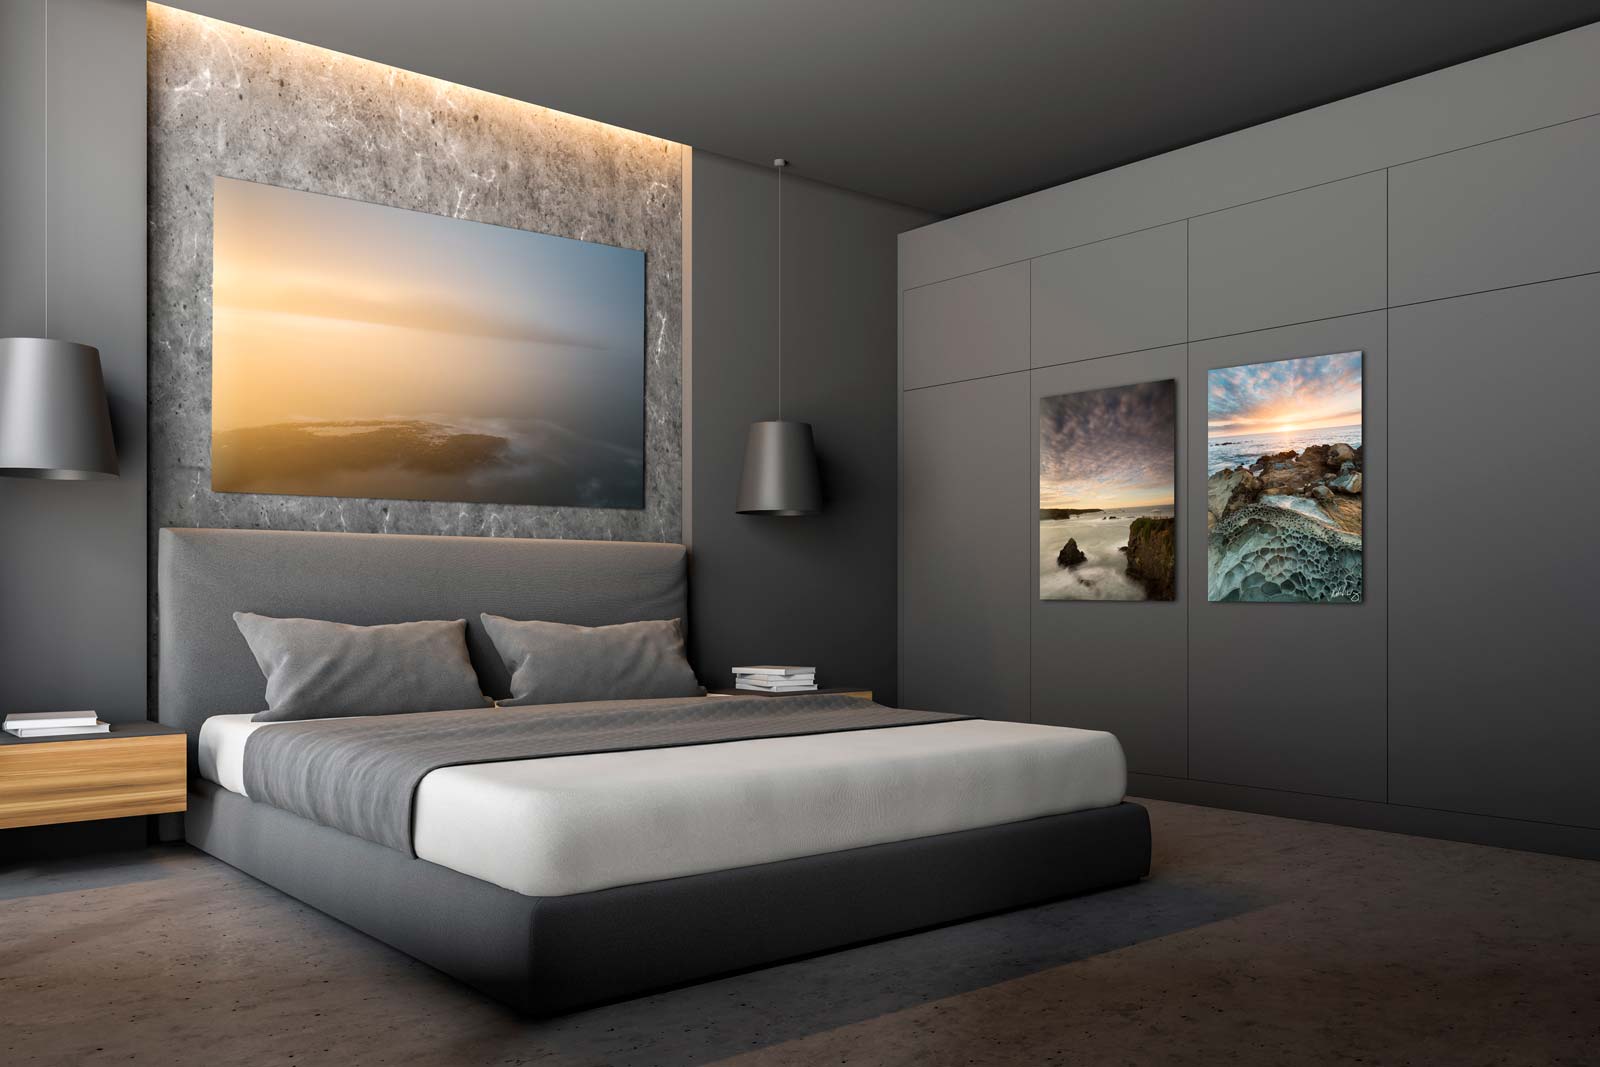 Bedroom Decorated With Art